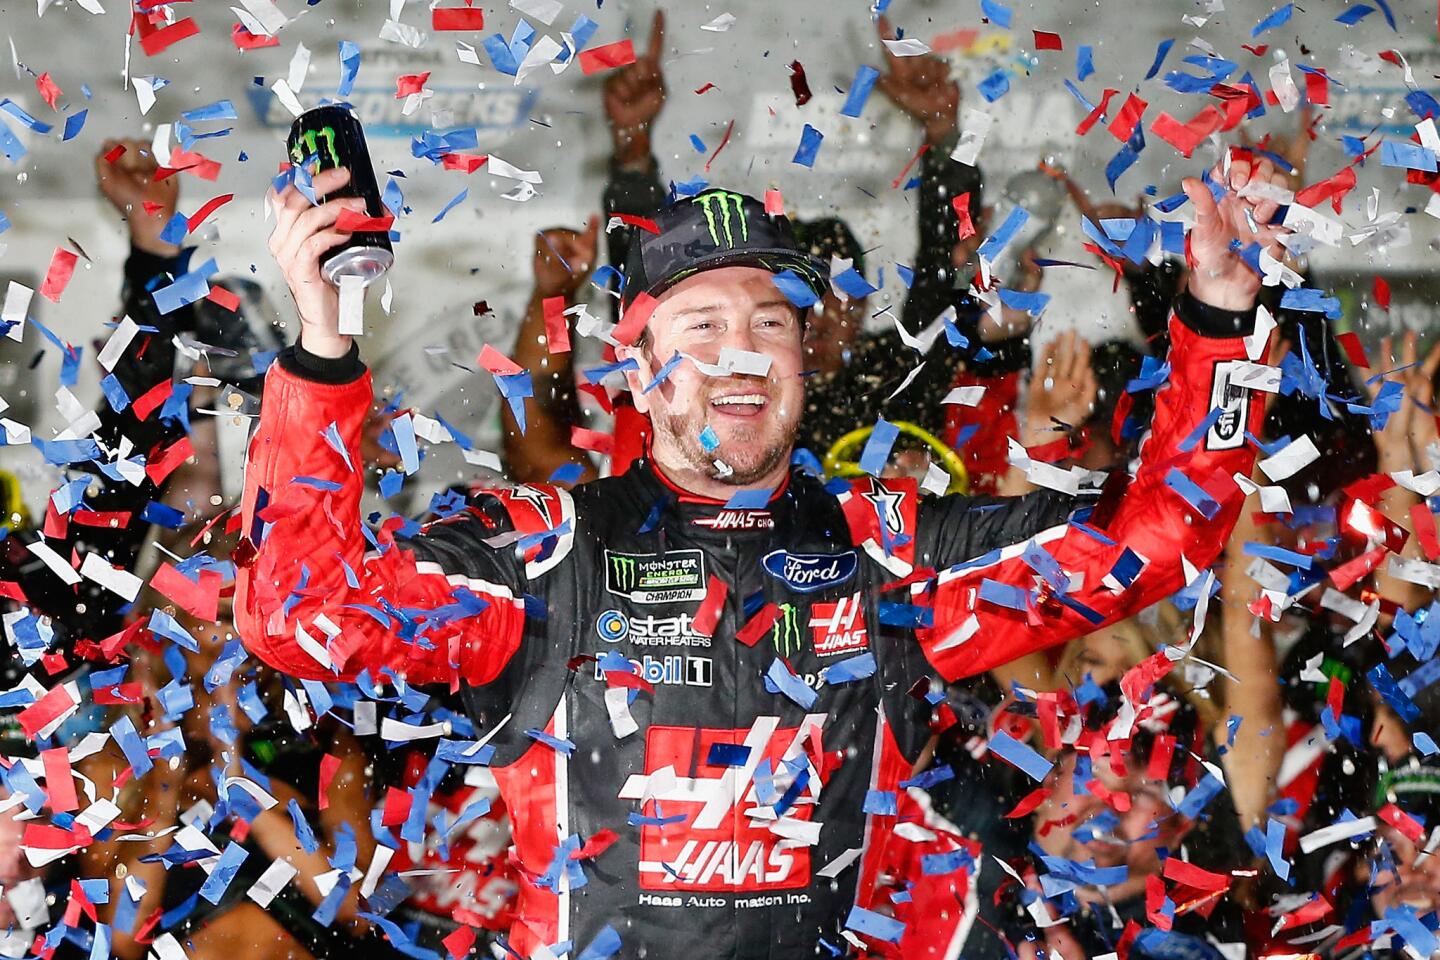 Kurt Busch, driver of the No. 41 Haas Automation/Monster Energy Ford, celebrates in Victory Lane after winning the 59th annual Daytona 500.